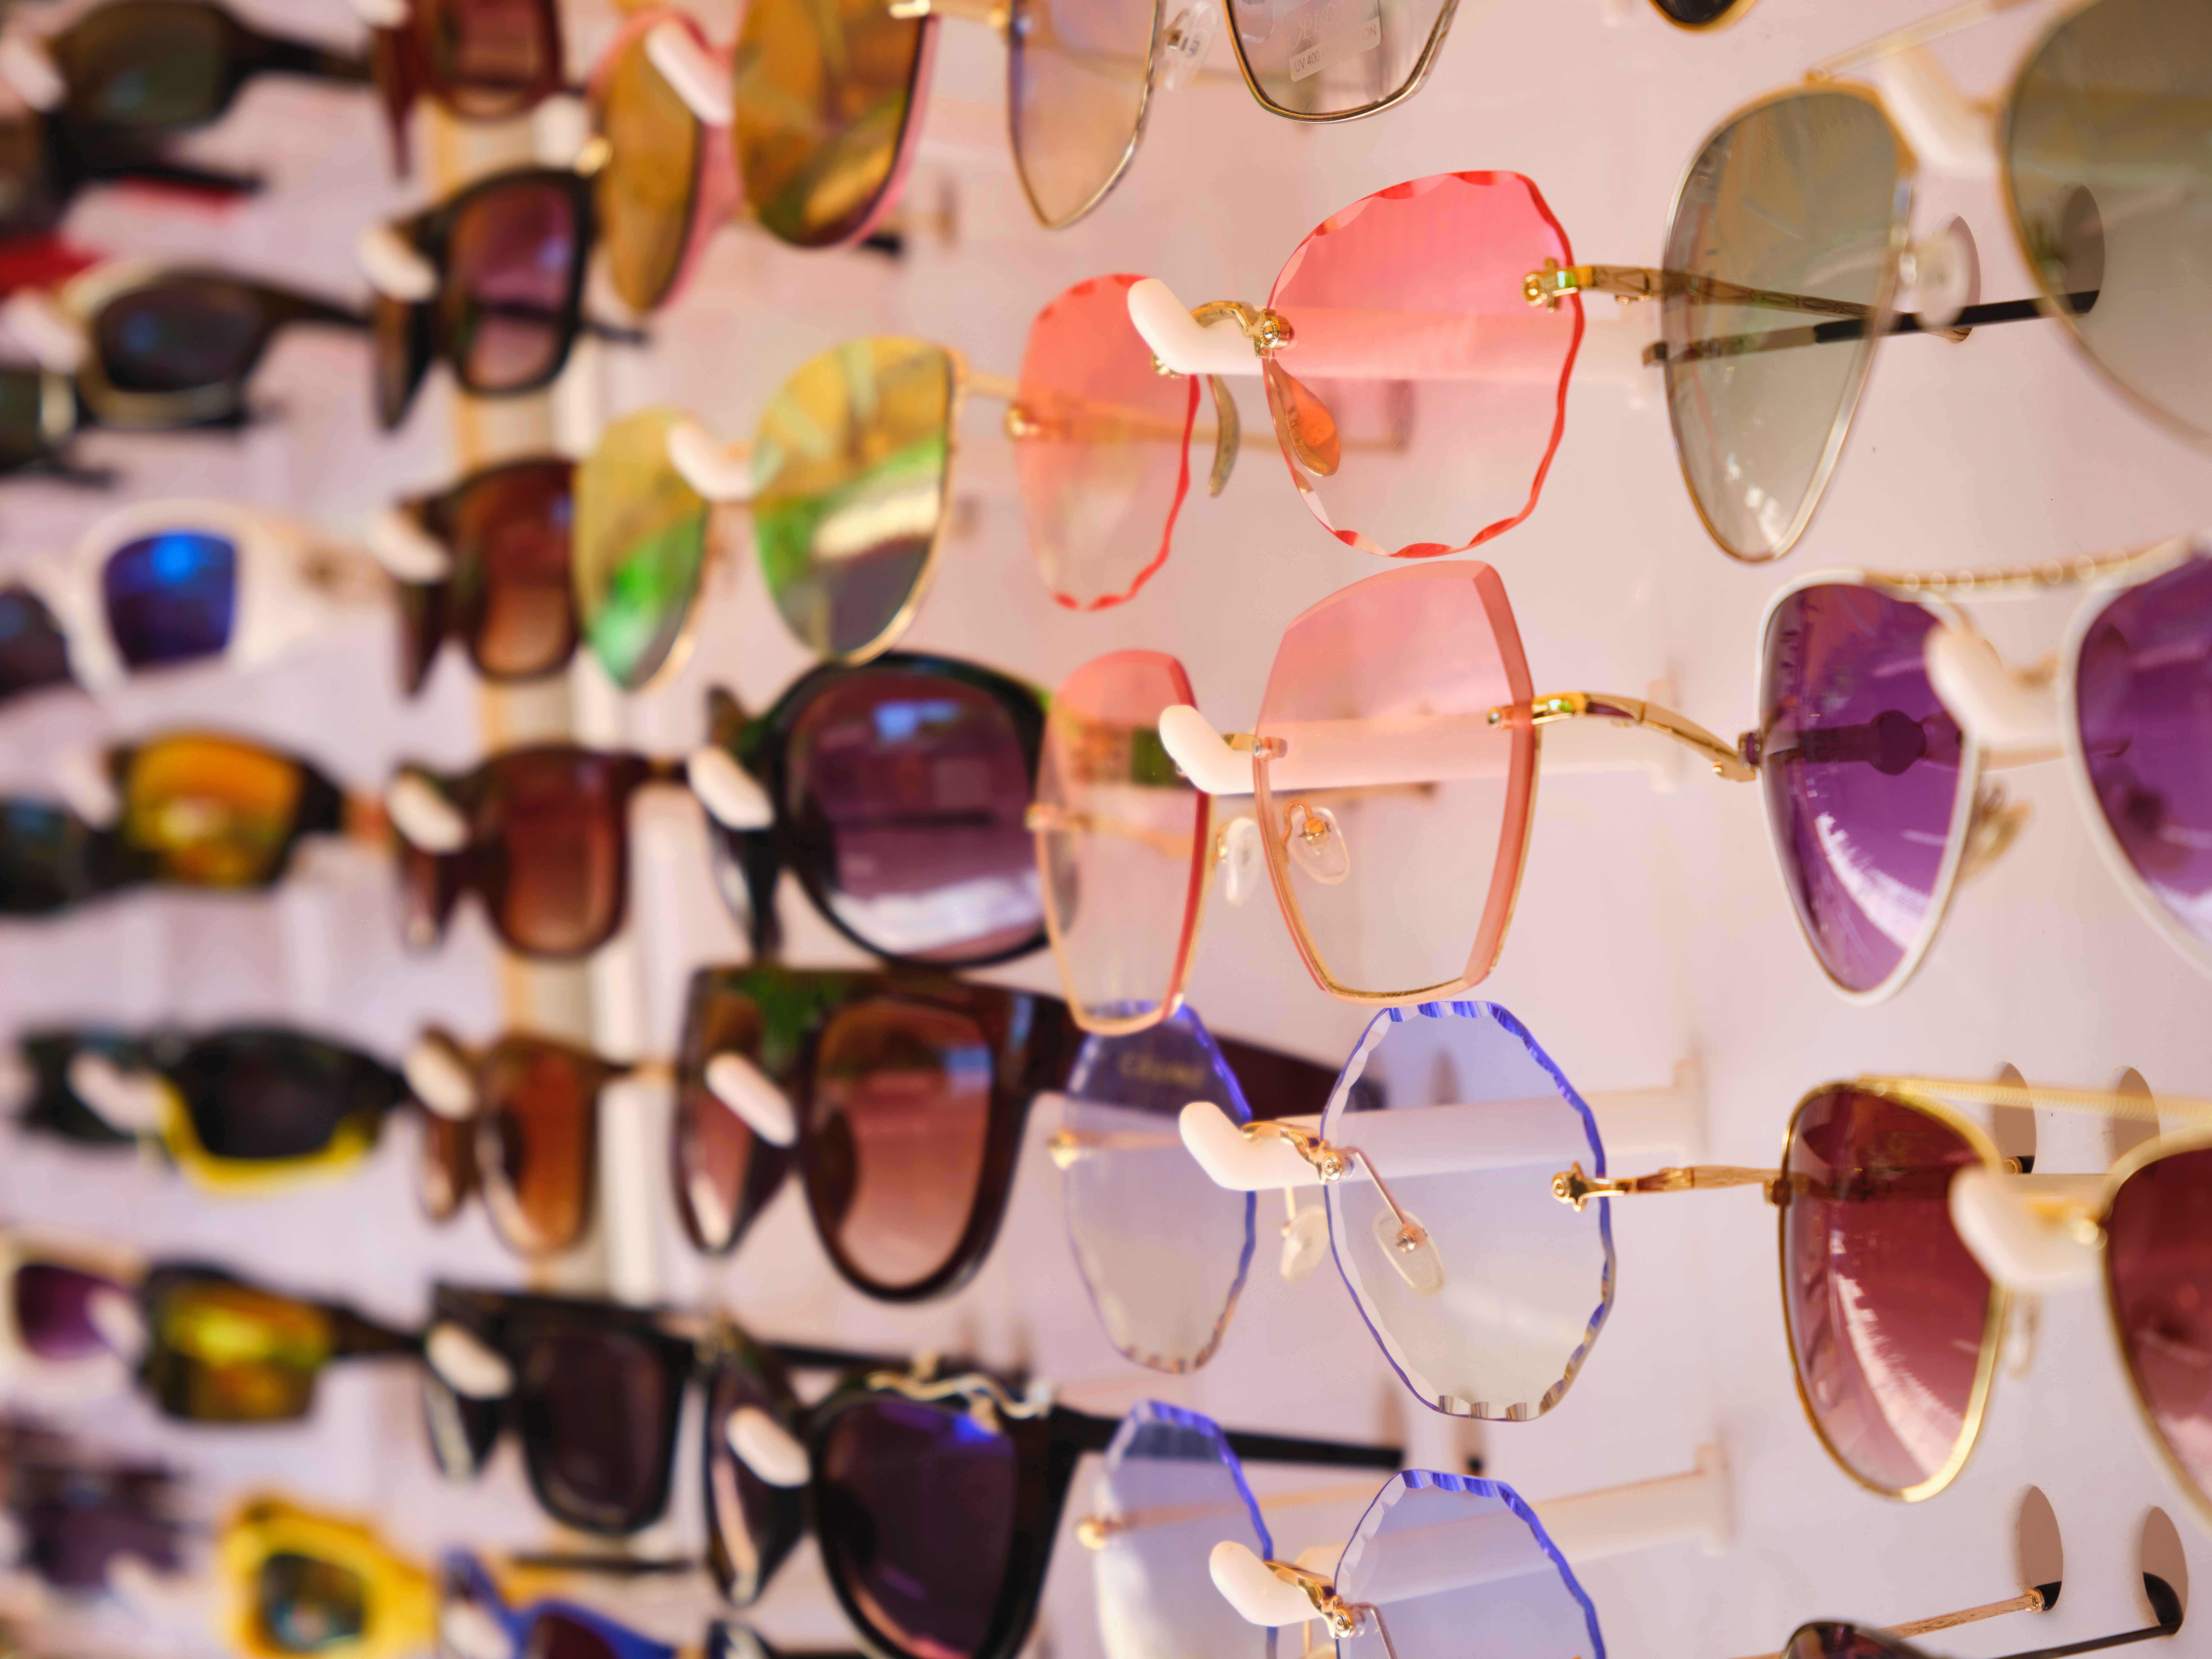 A wide variety of sunglasses on display